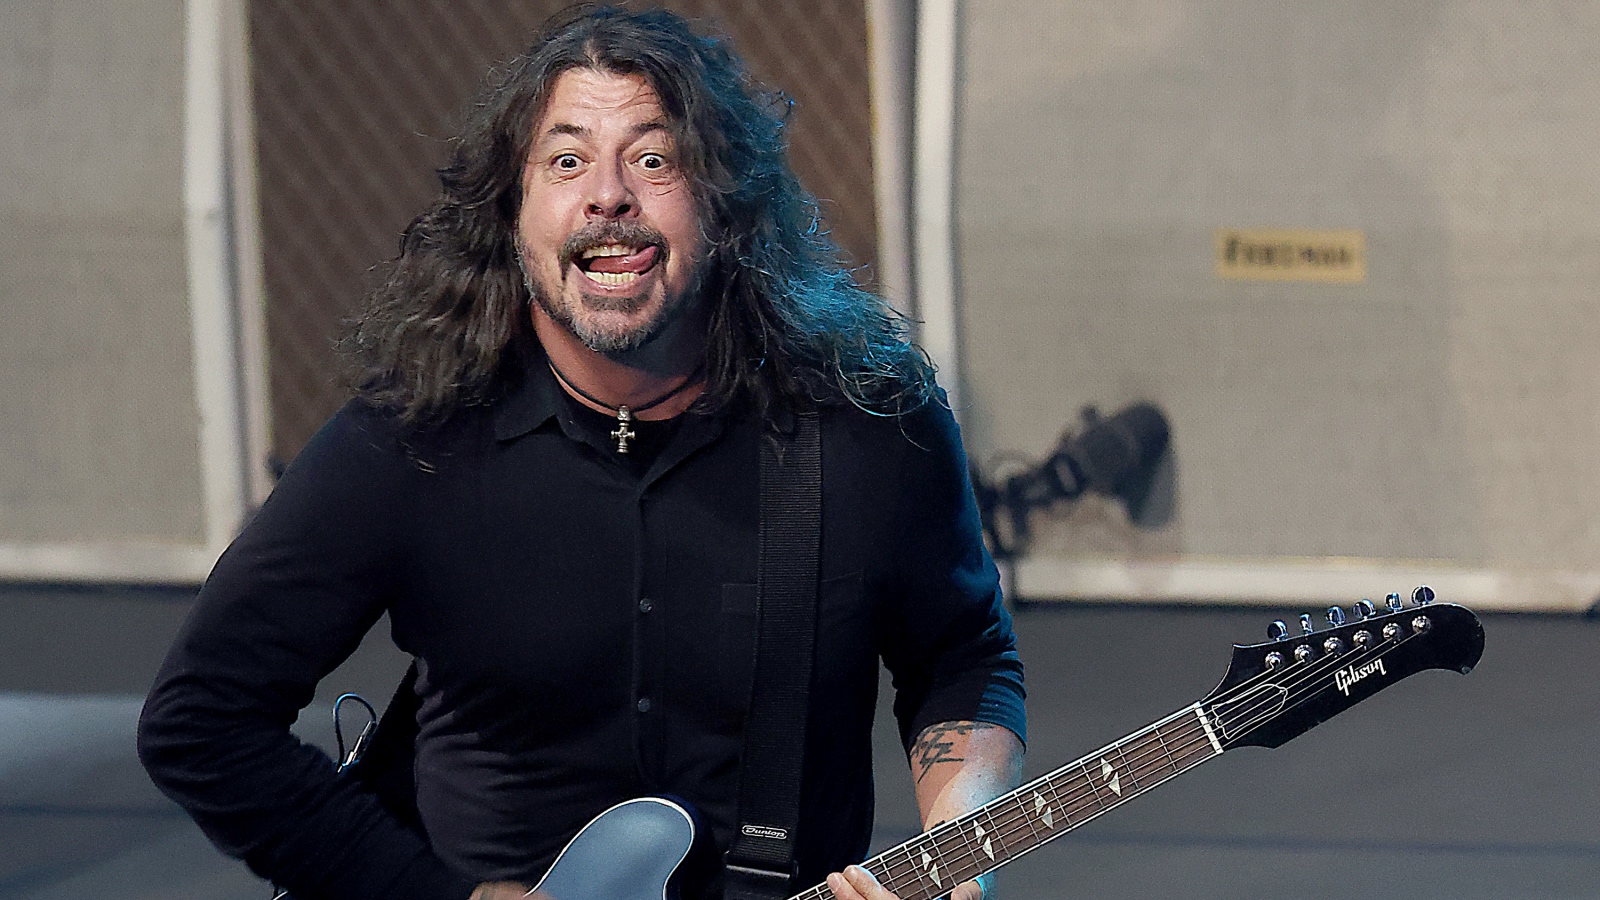 Dave Grohl and The Foo Fighters